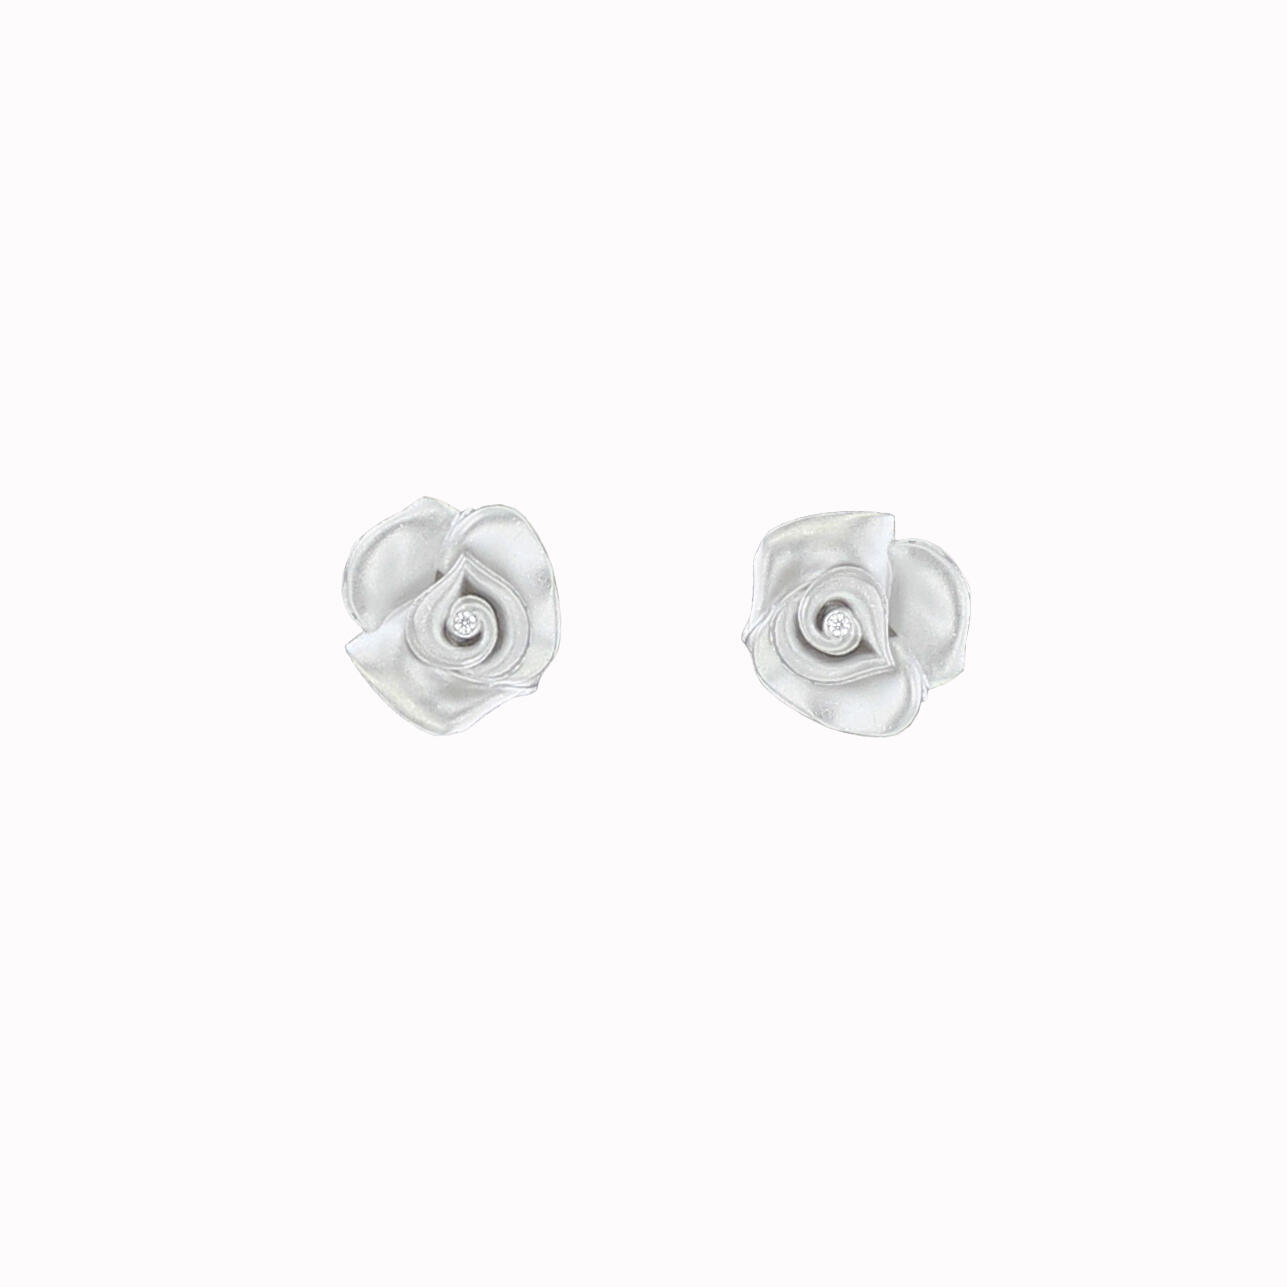 Pair of Schroeder Joailliers earrings from the "Rose of Luxembourg" collection in polished and sandblasted 18k white gold